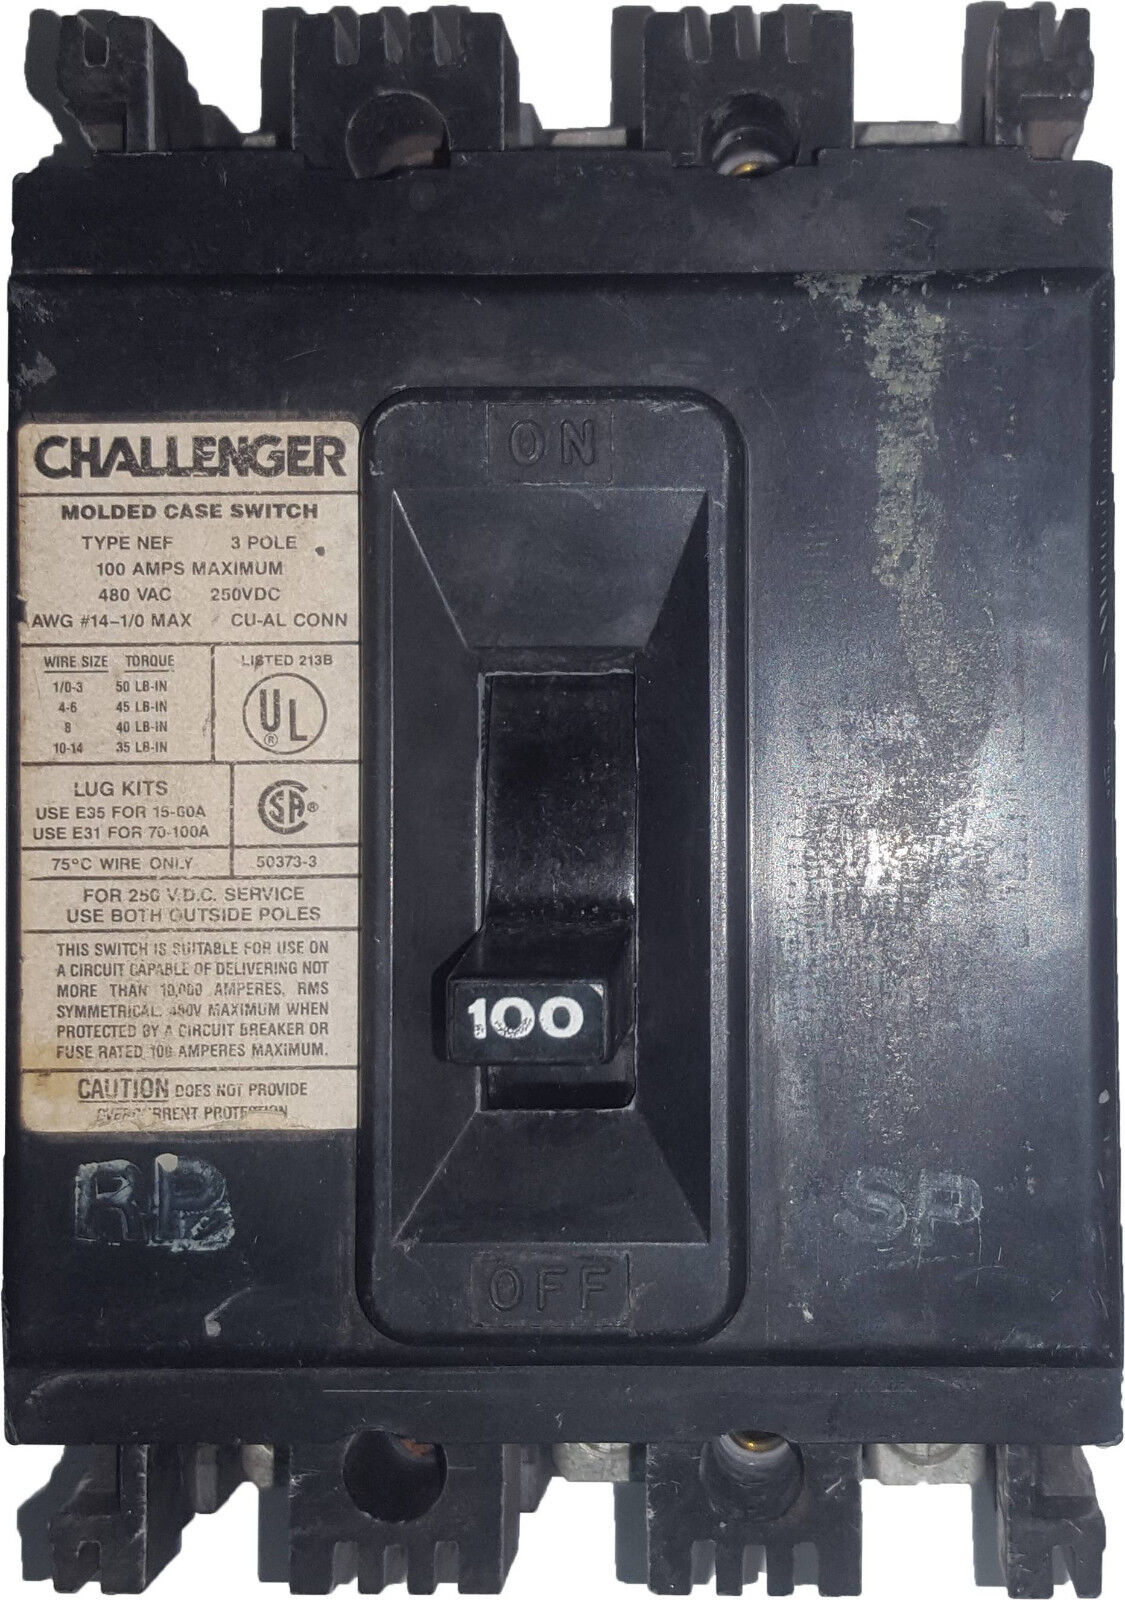 Challenger EDPAC E040002 3 Pole 100A 480VAC 250VDC Molded Case Switch NEW IN BOX